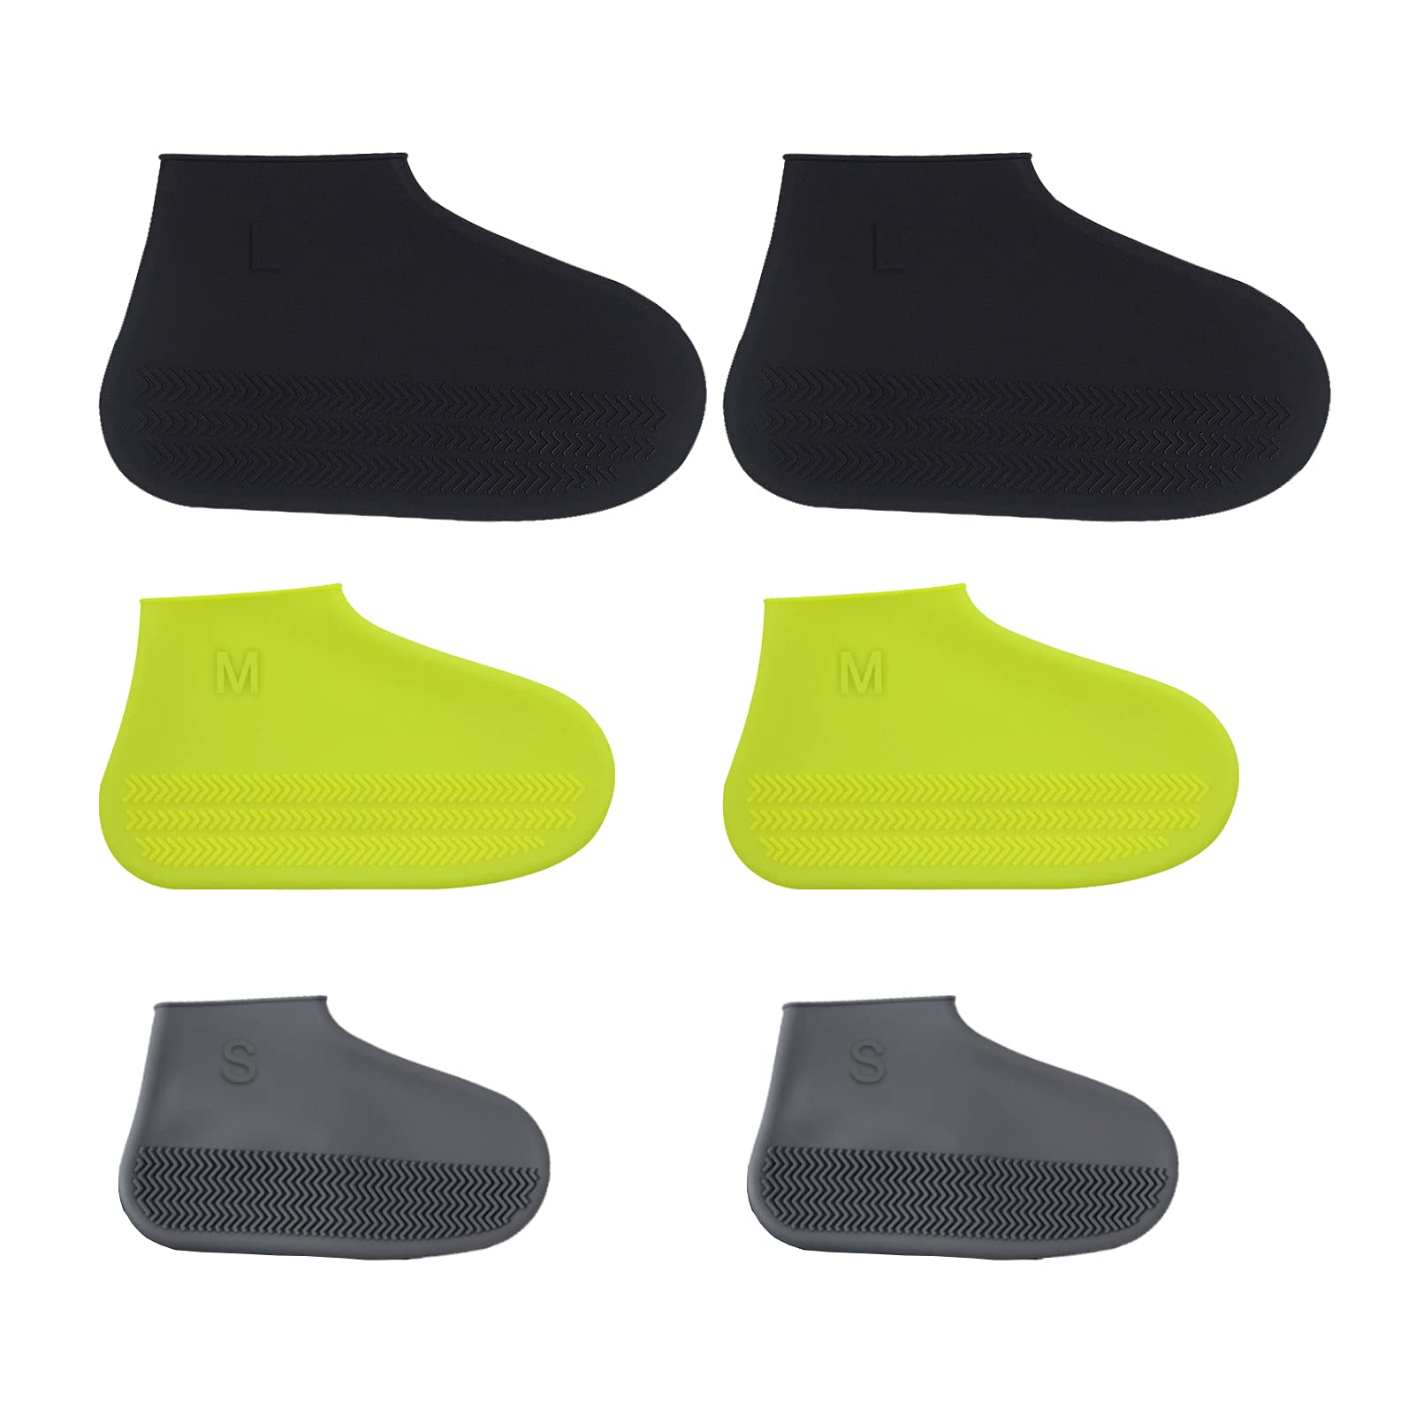 Waterproof Silicone Rain Shoe Covers, Impermeables Silicone Rubber Boot Covers,Non-Slip,Water Resistant,Reusable,Stretchable,Foldable,for Kids,Men,Women Cycling,Outdoor Protection